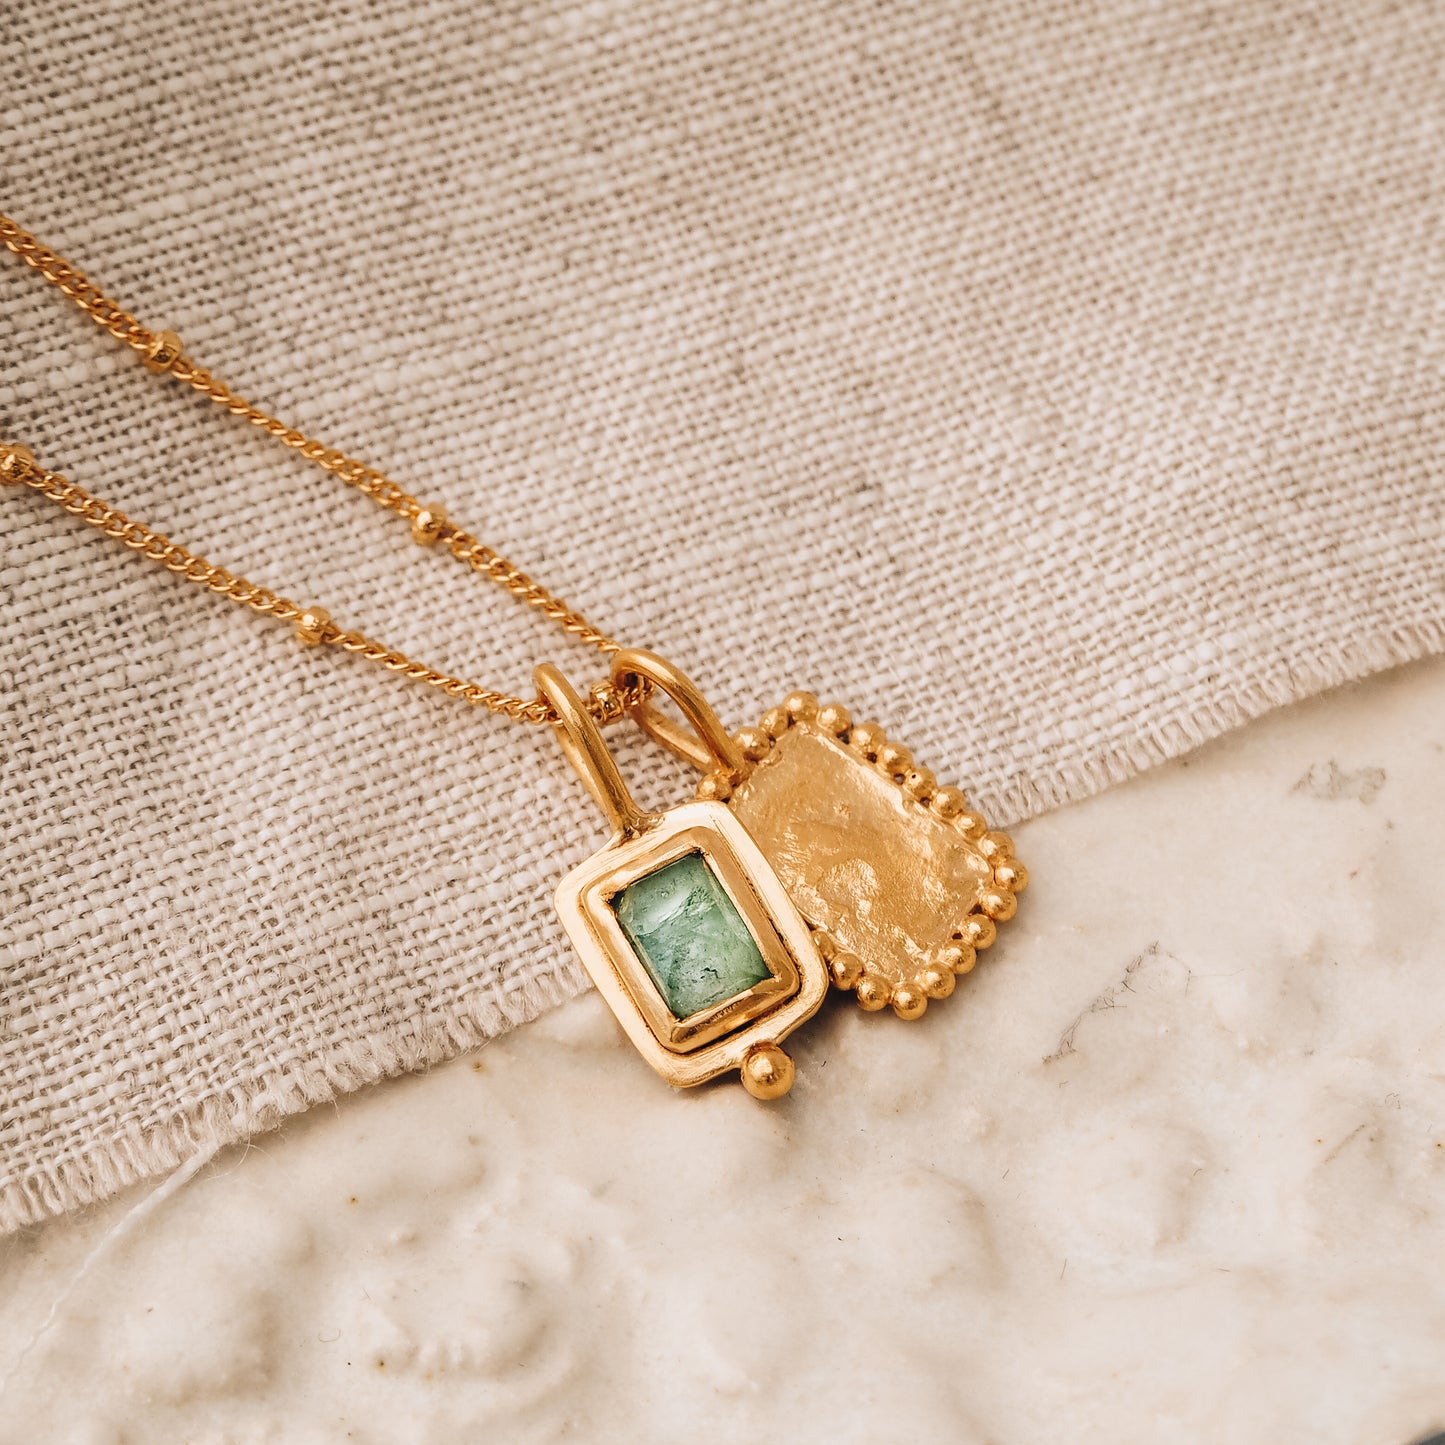 Square gold pendant showcasing a stunning blue rose cut tourmaline gemstone and meticulous granulation, suspended from a dainty satellite chain.